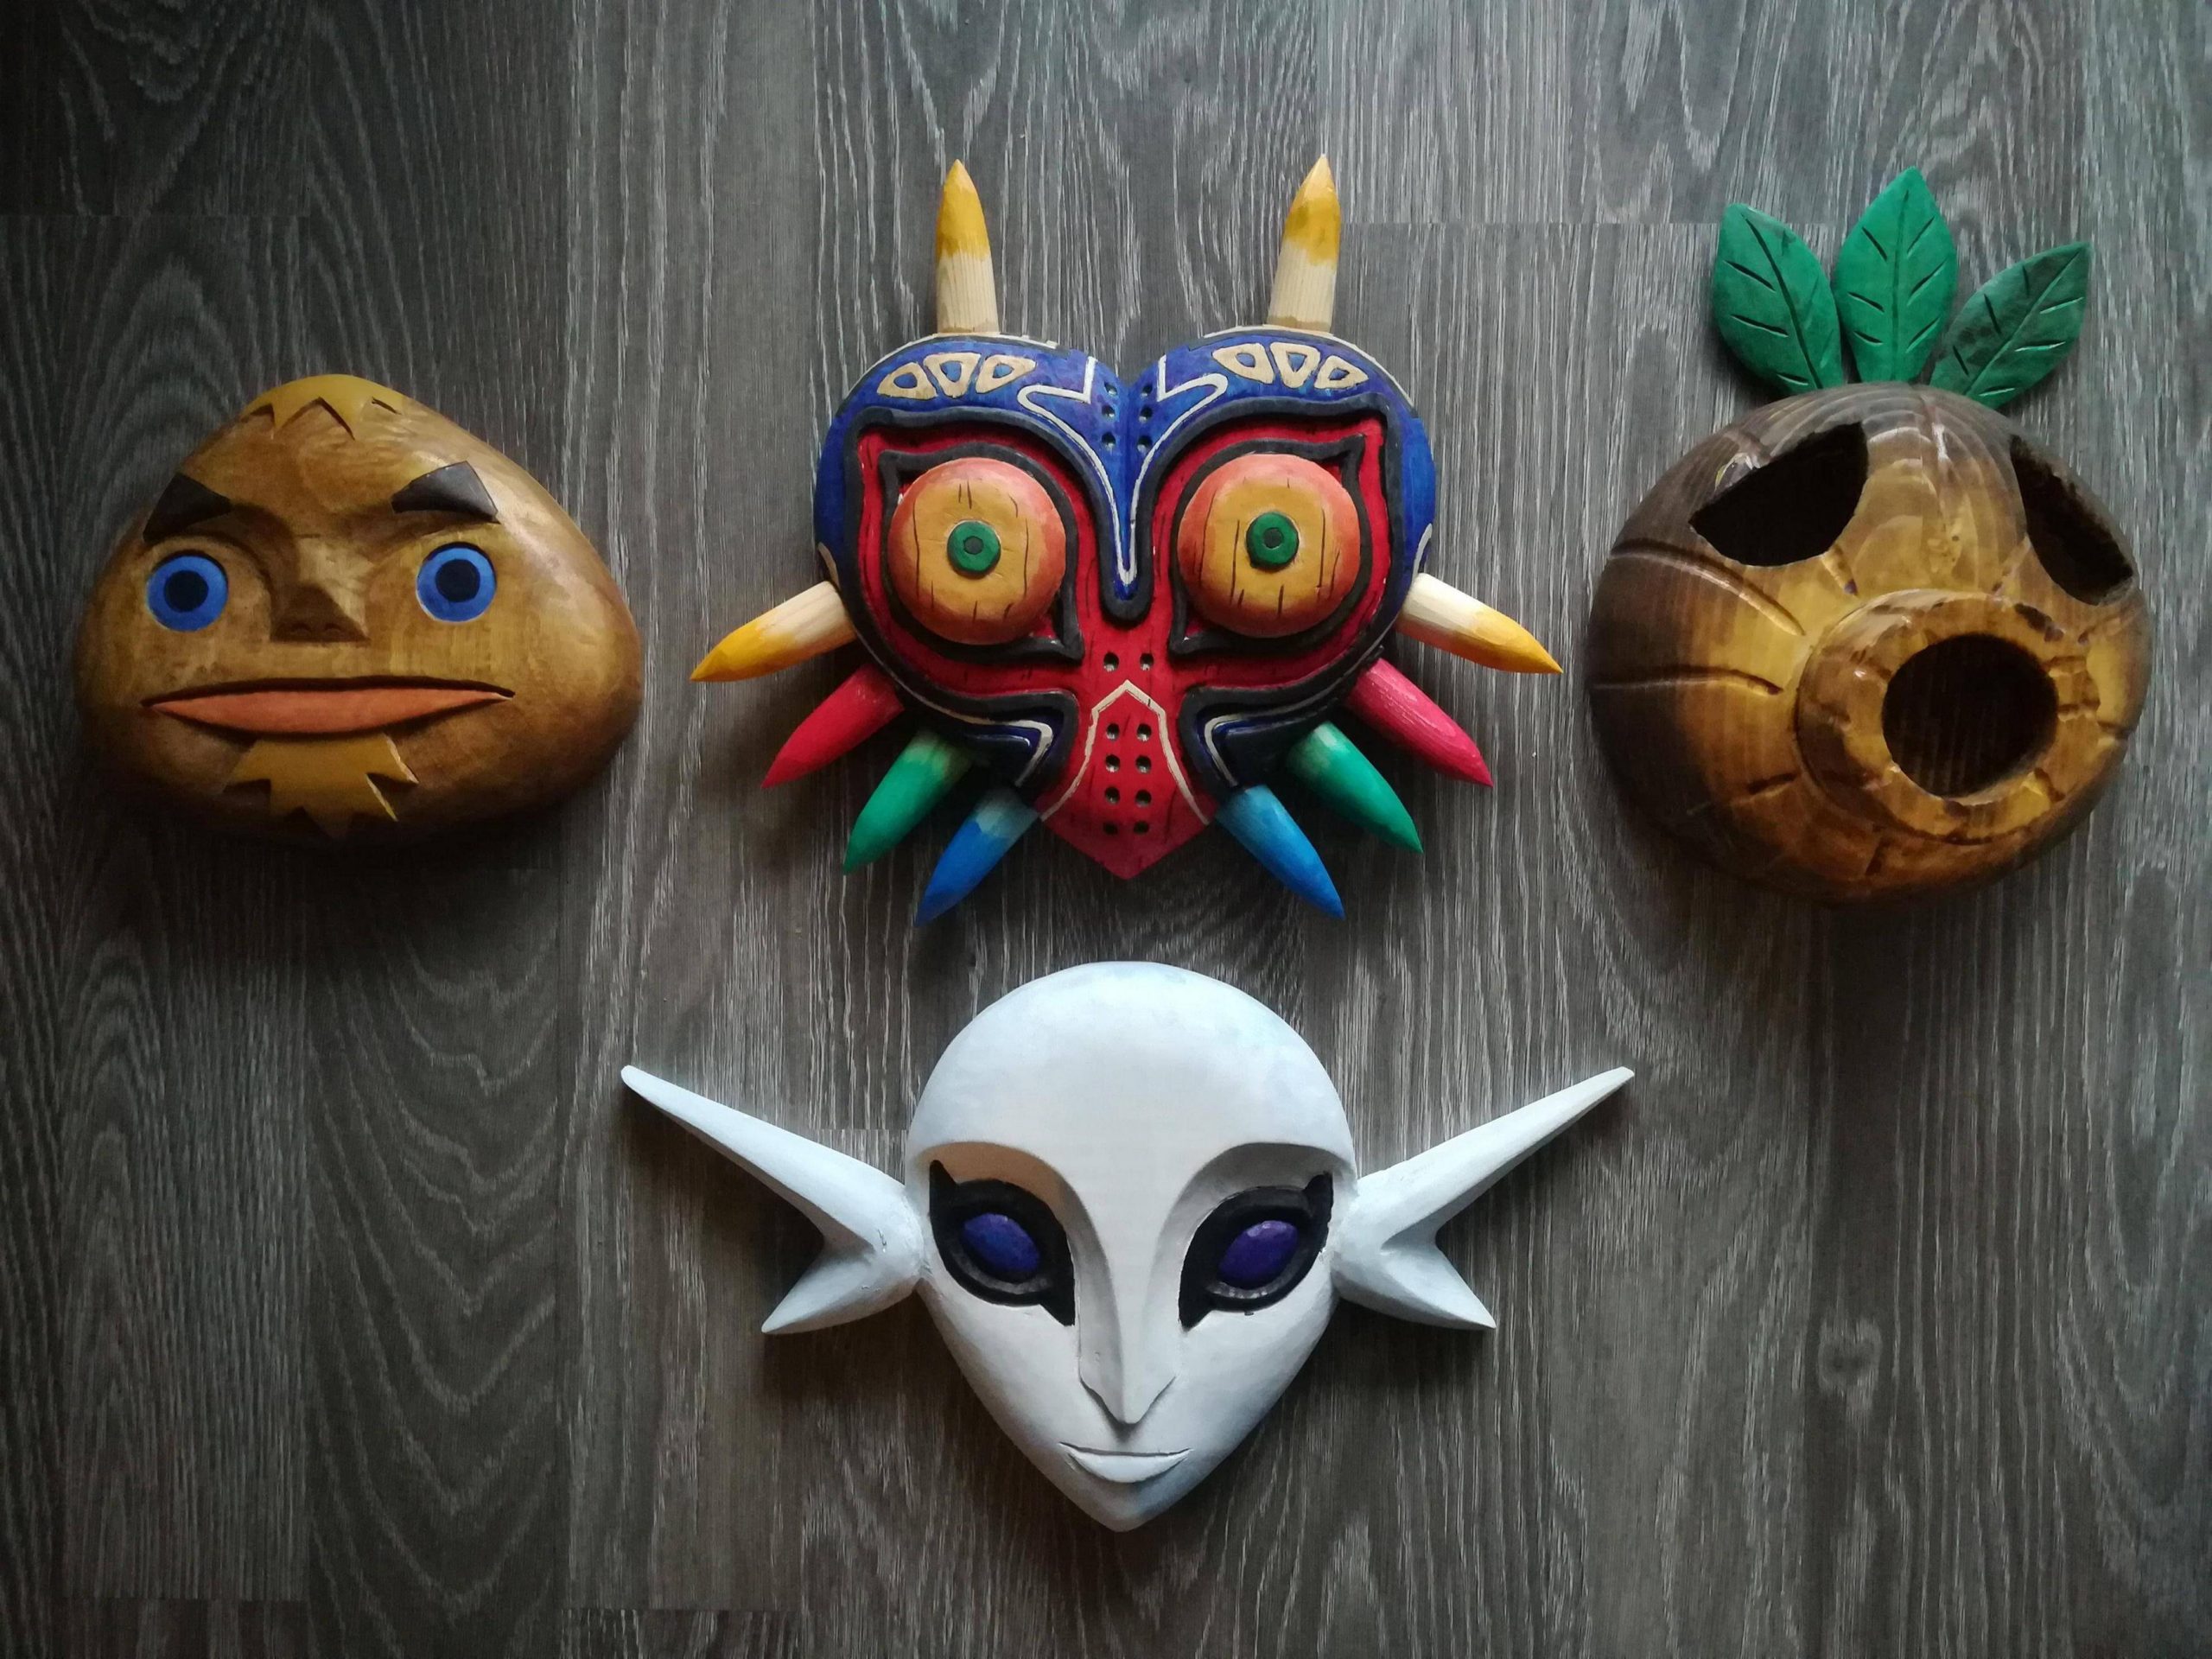 Handcrafted masks from Story Of Zelda video games.